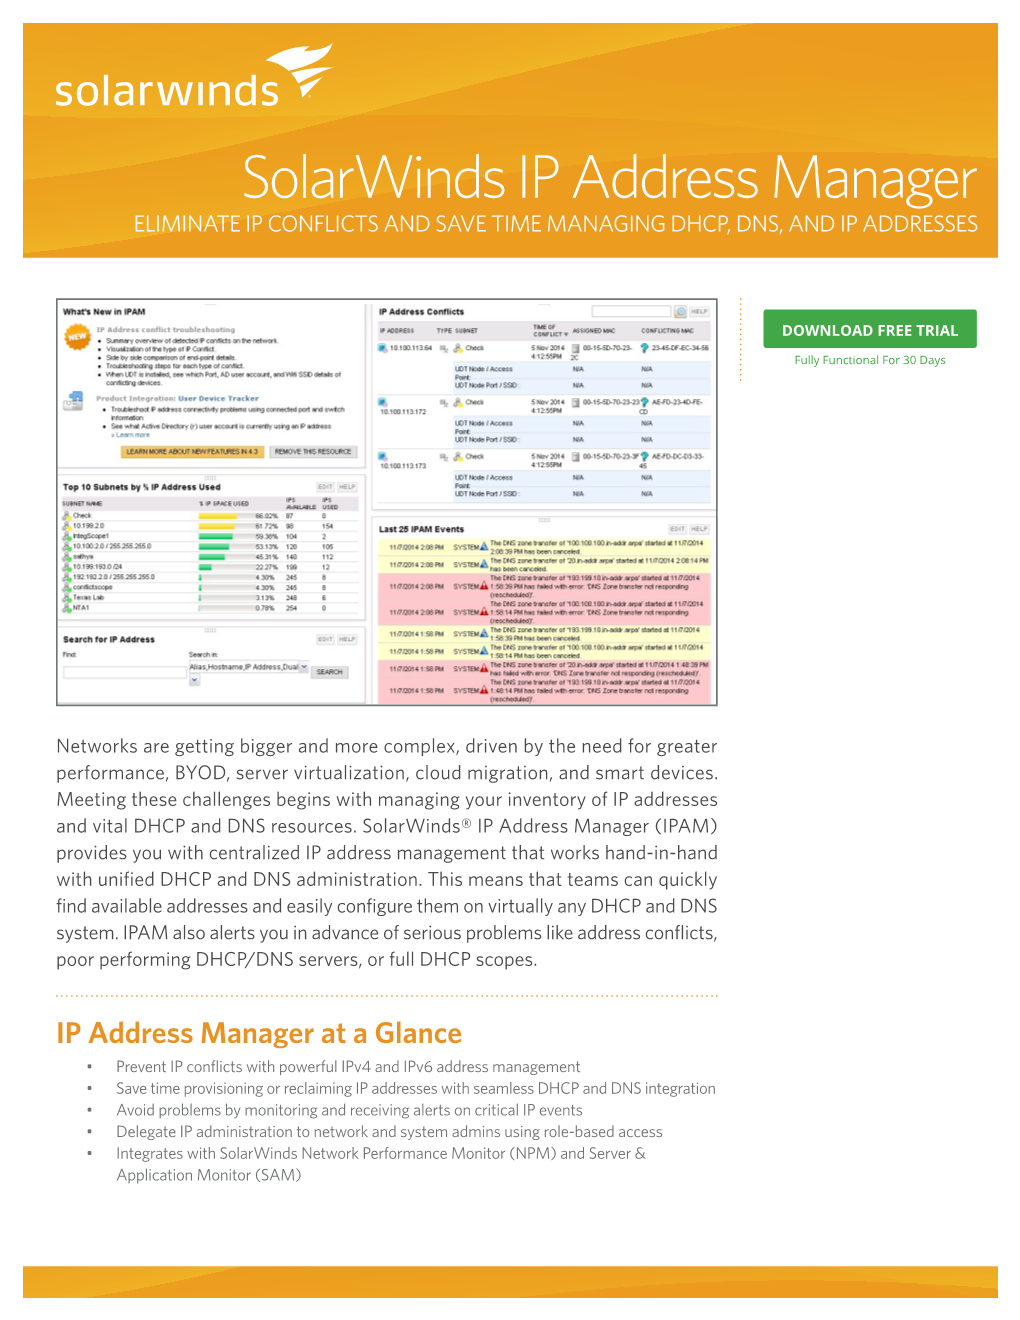 Solarwinds IP Address Manager ELIMINATE IP CONFLICTS and SAVE TIME MANAGING DHCP, DNS, and IP ADDRESSES